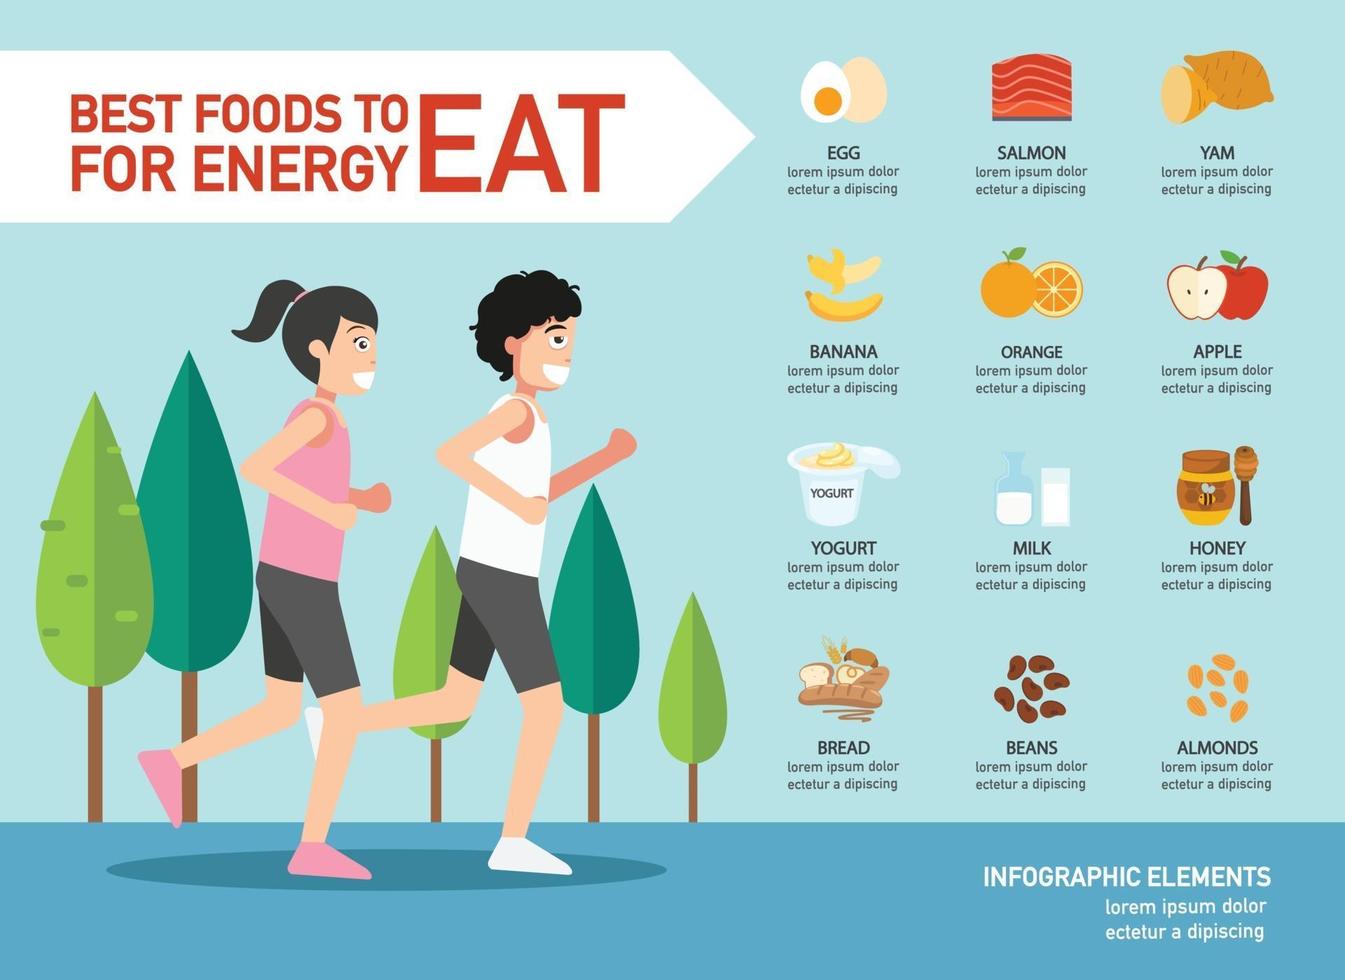 Best foods to eat for energy infographic, illustration vector